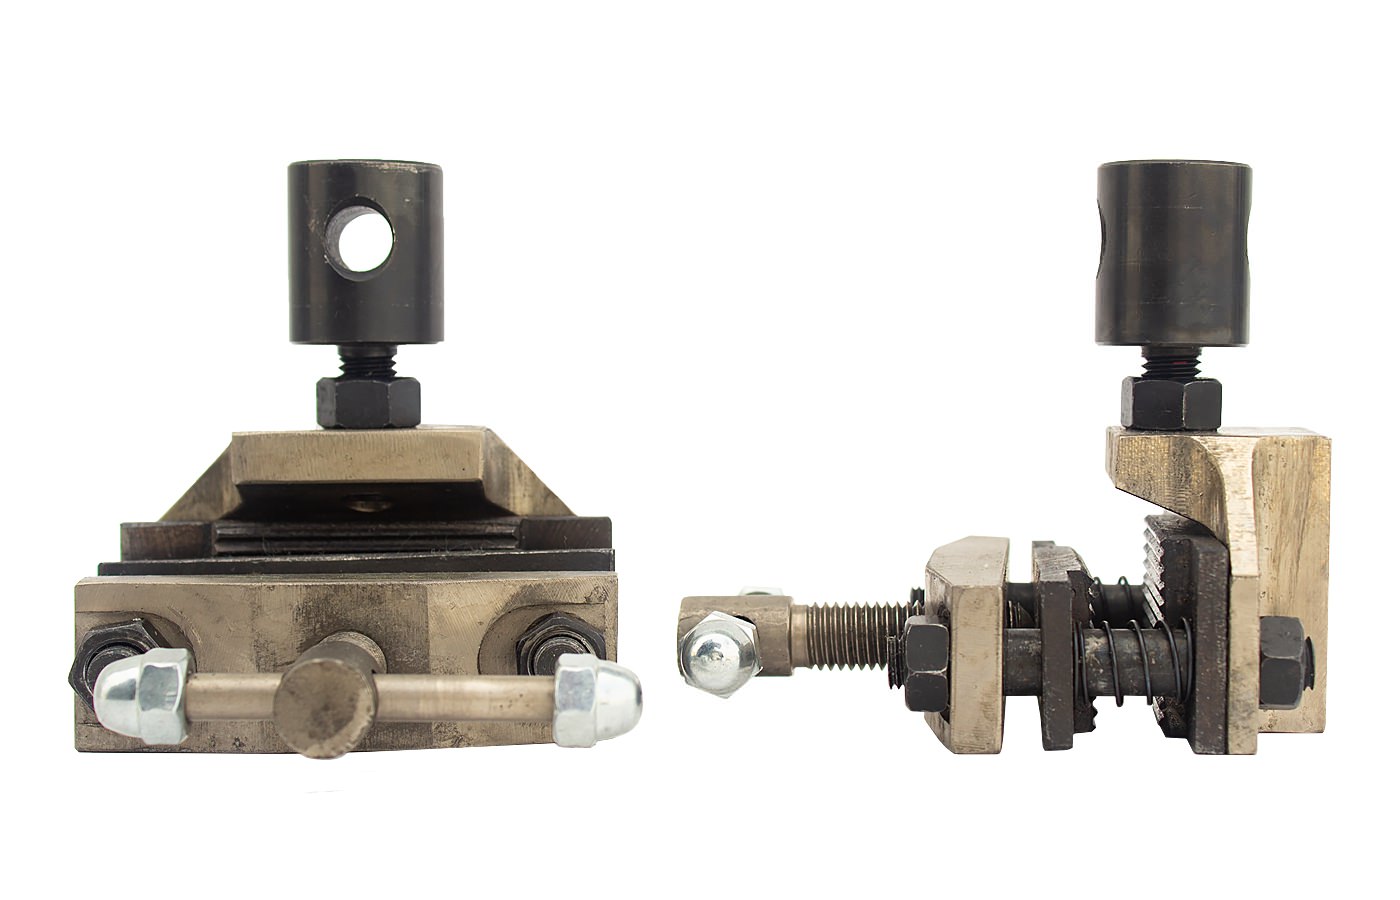 Vise grip with wave inserts (up to 5 kN)